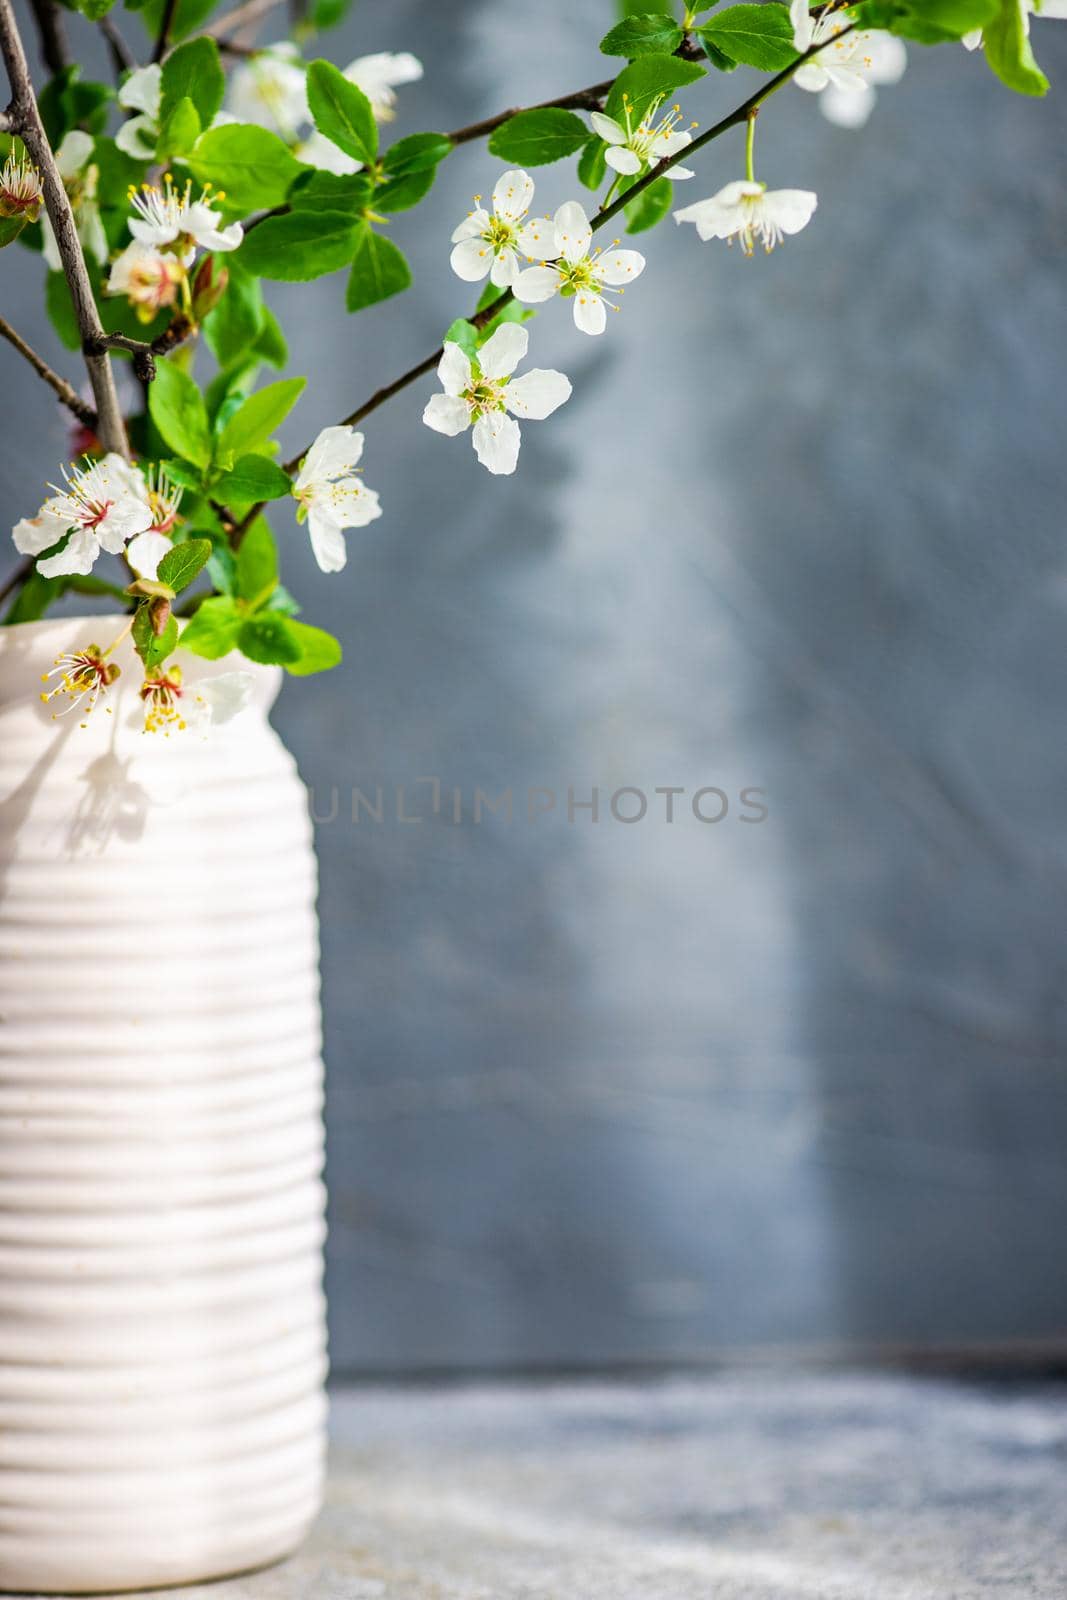 Blooming cherry tree branches in the vase by Elet